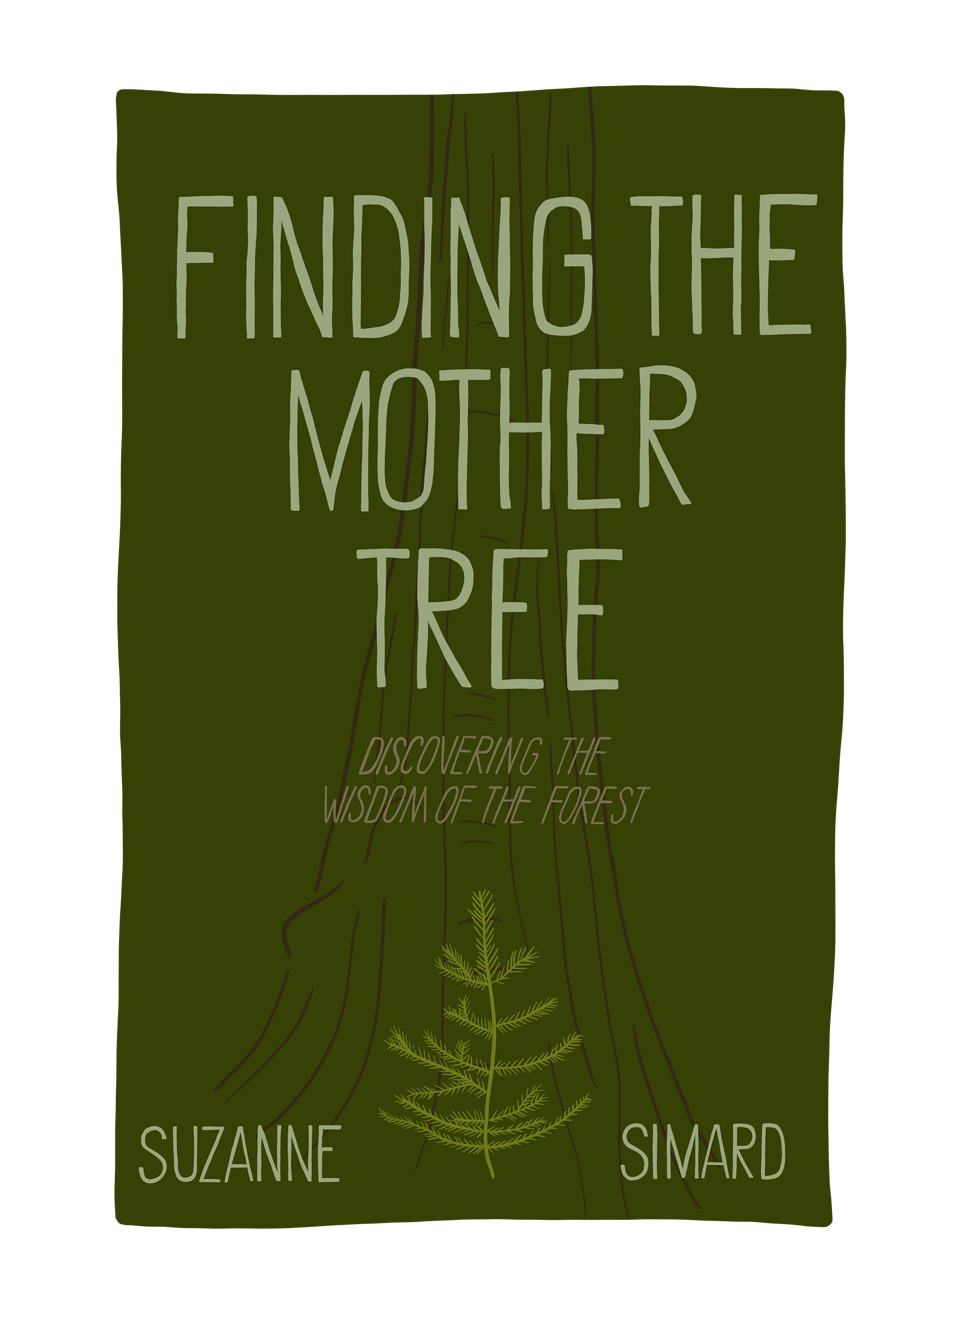 Finding The Mother Tree. Discovering the Wisdom of the Forest by Suzanne Simard | illustrated by Alicia Carvalho